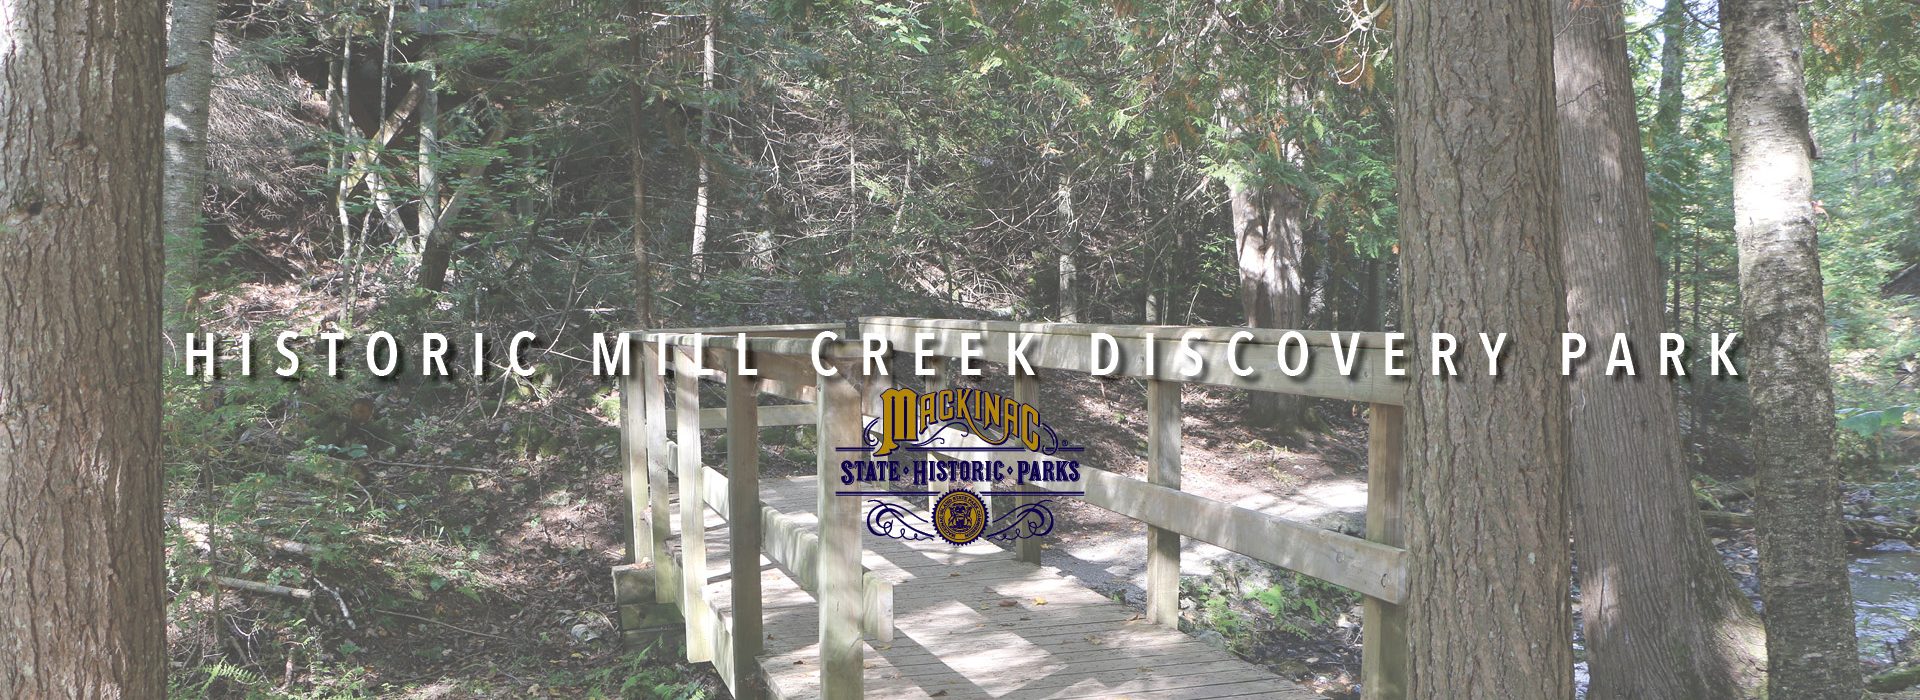 historic mill creek discovery park